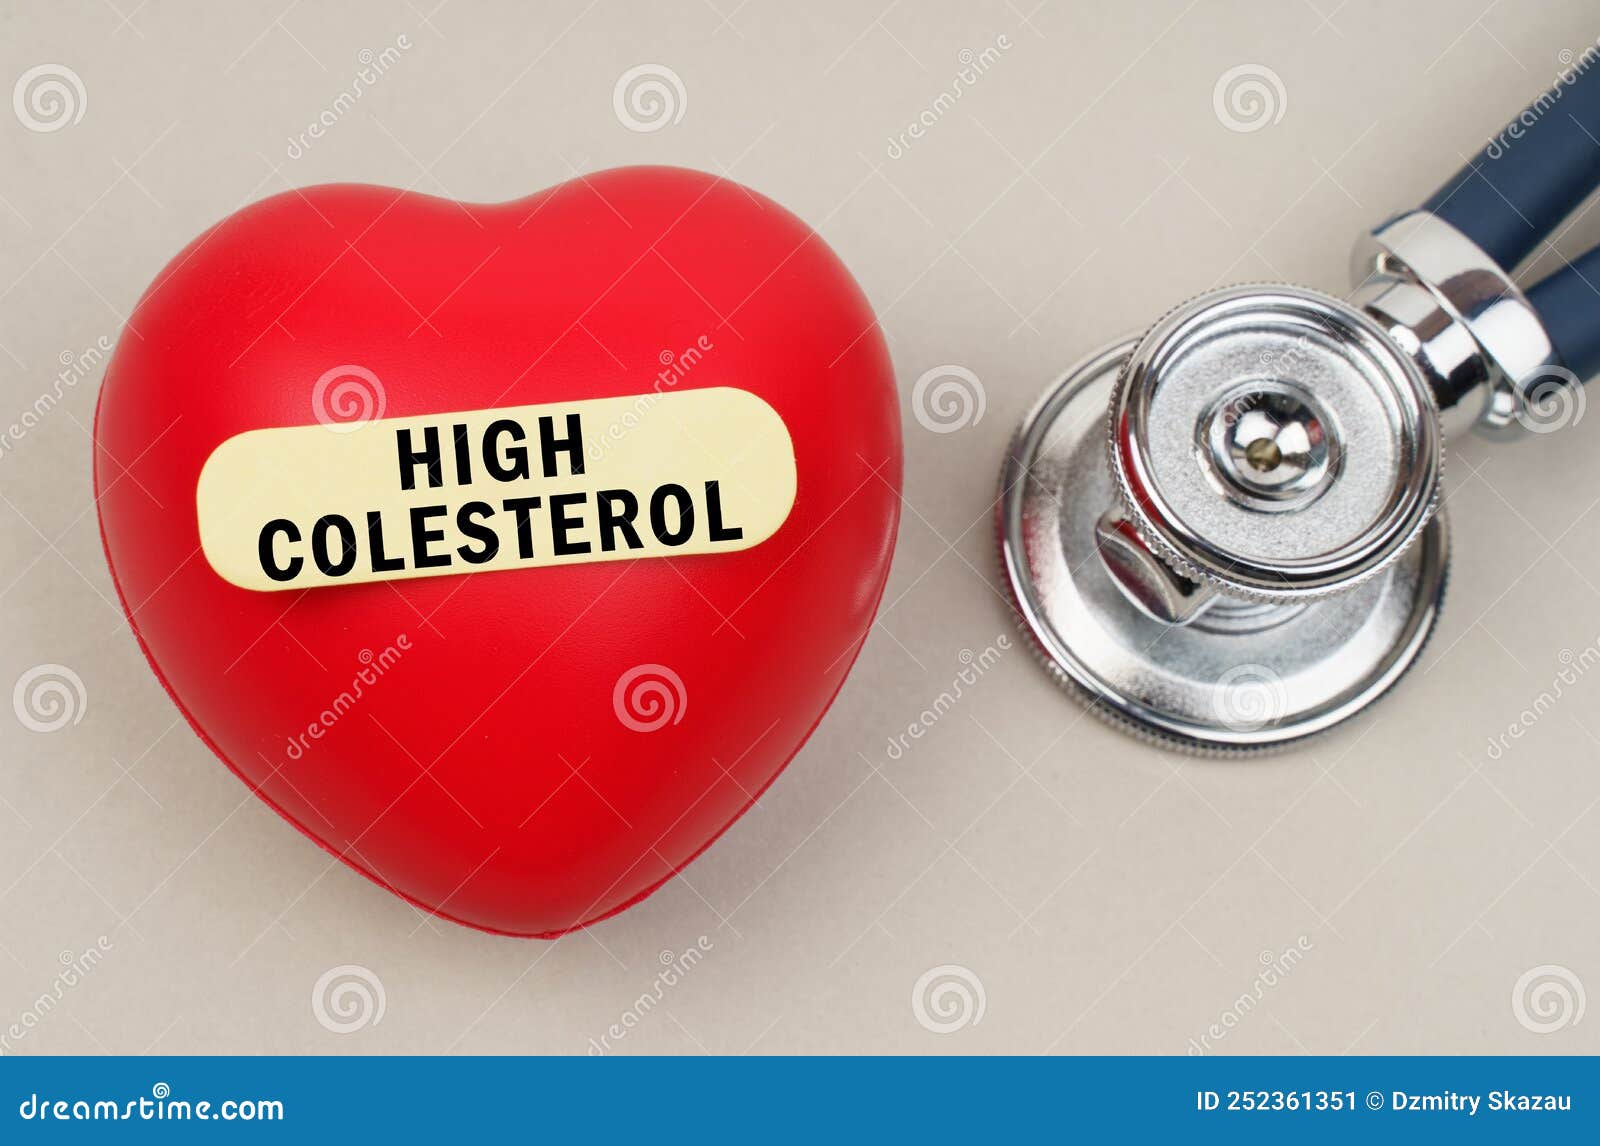 near the stethoscope lies a heart on which a sticker is pasted with the inscription - high colesterol